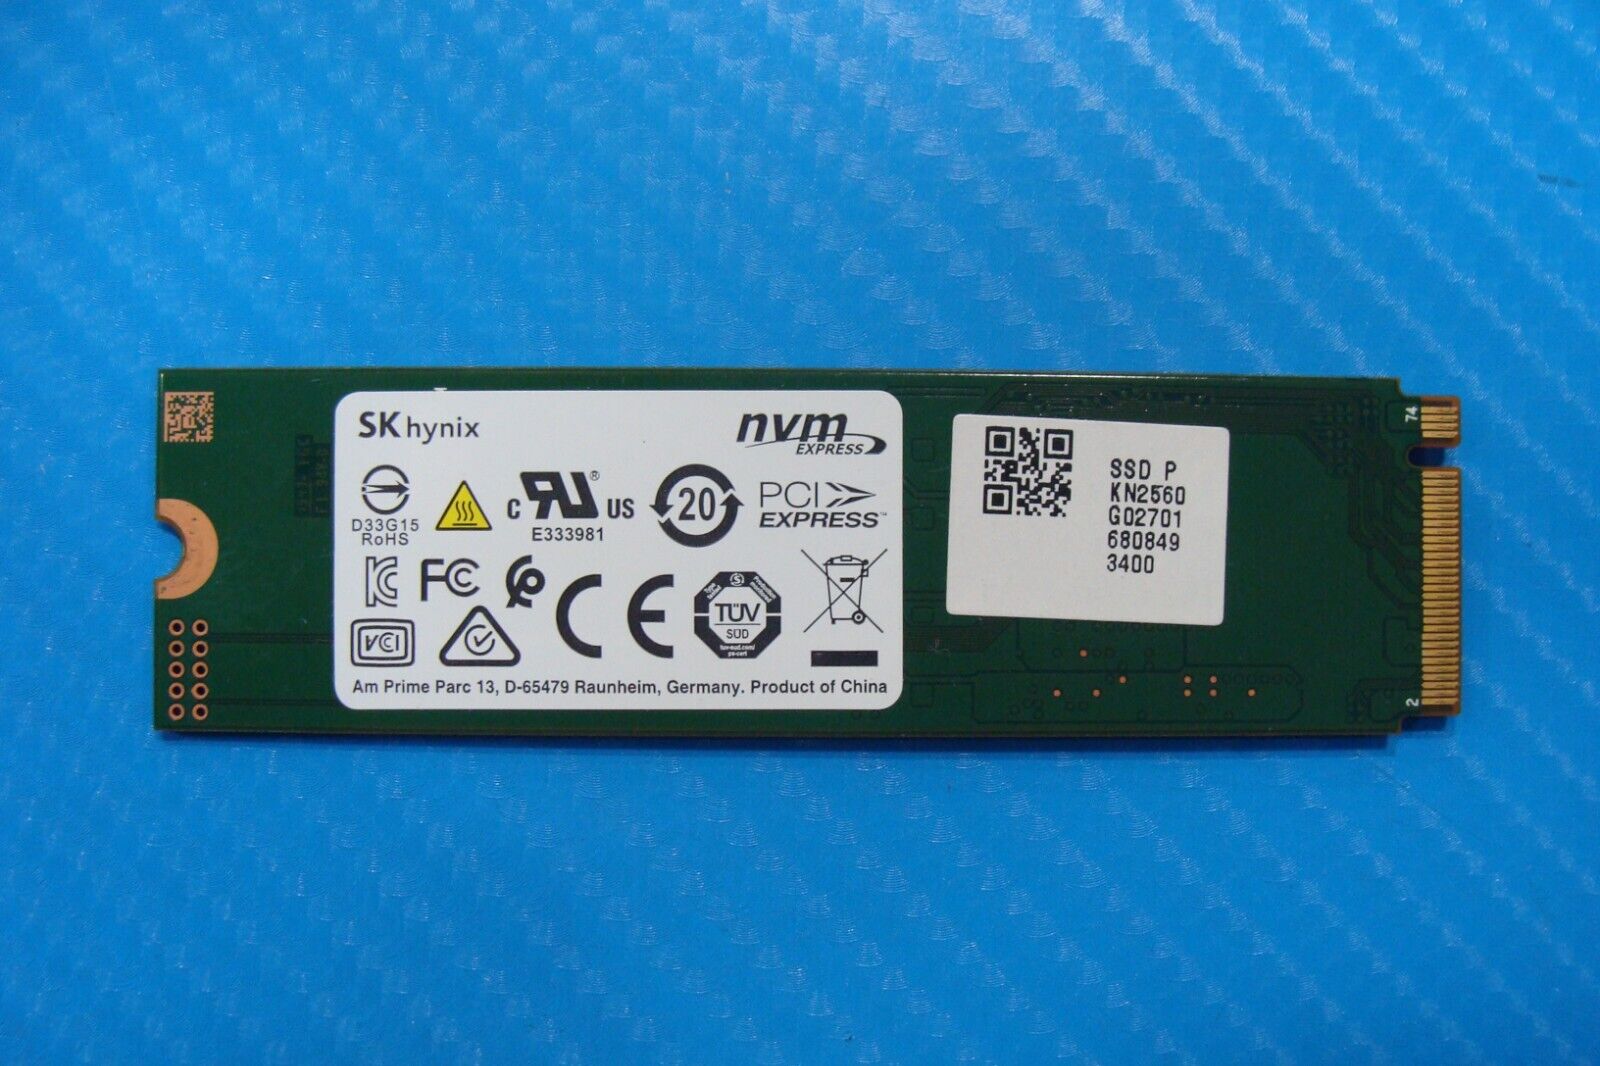 Acer A315-42-R0W1 SK Hynix 256GB NVMe SSD Solid State Drive HFM256GDJTNG-8310A